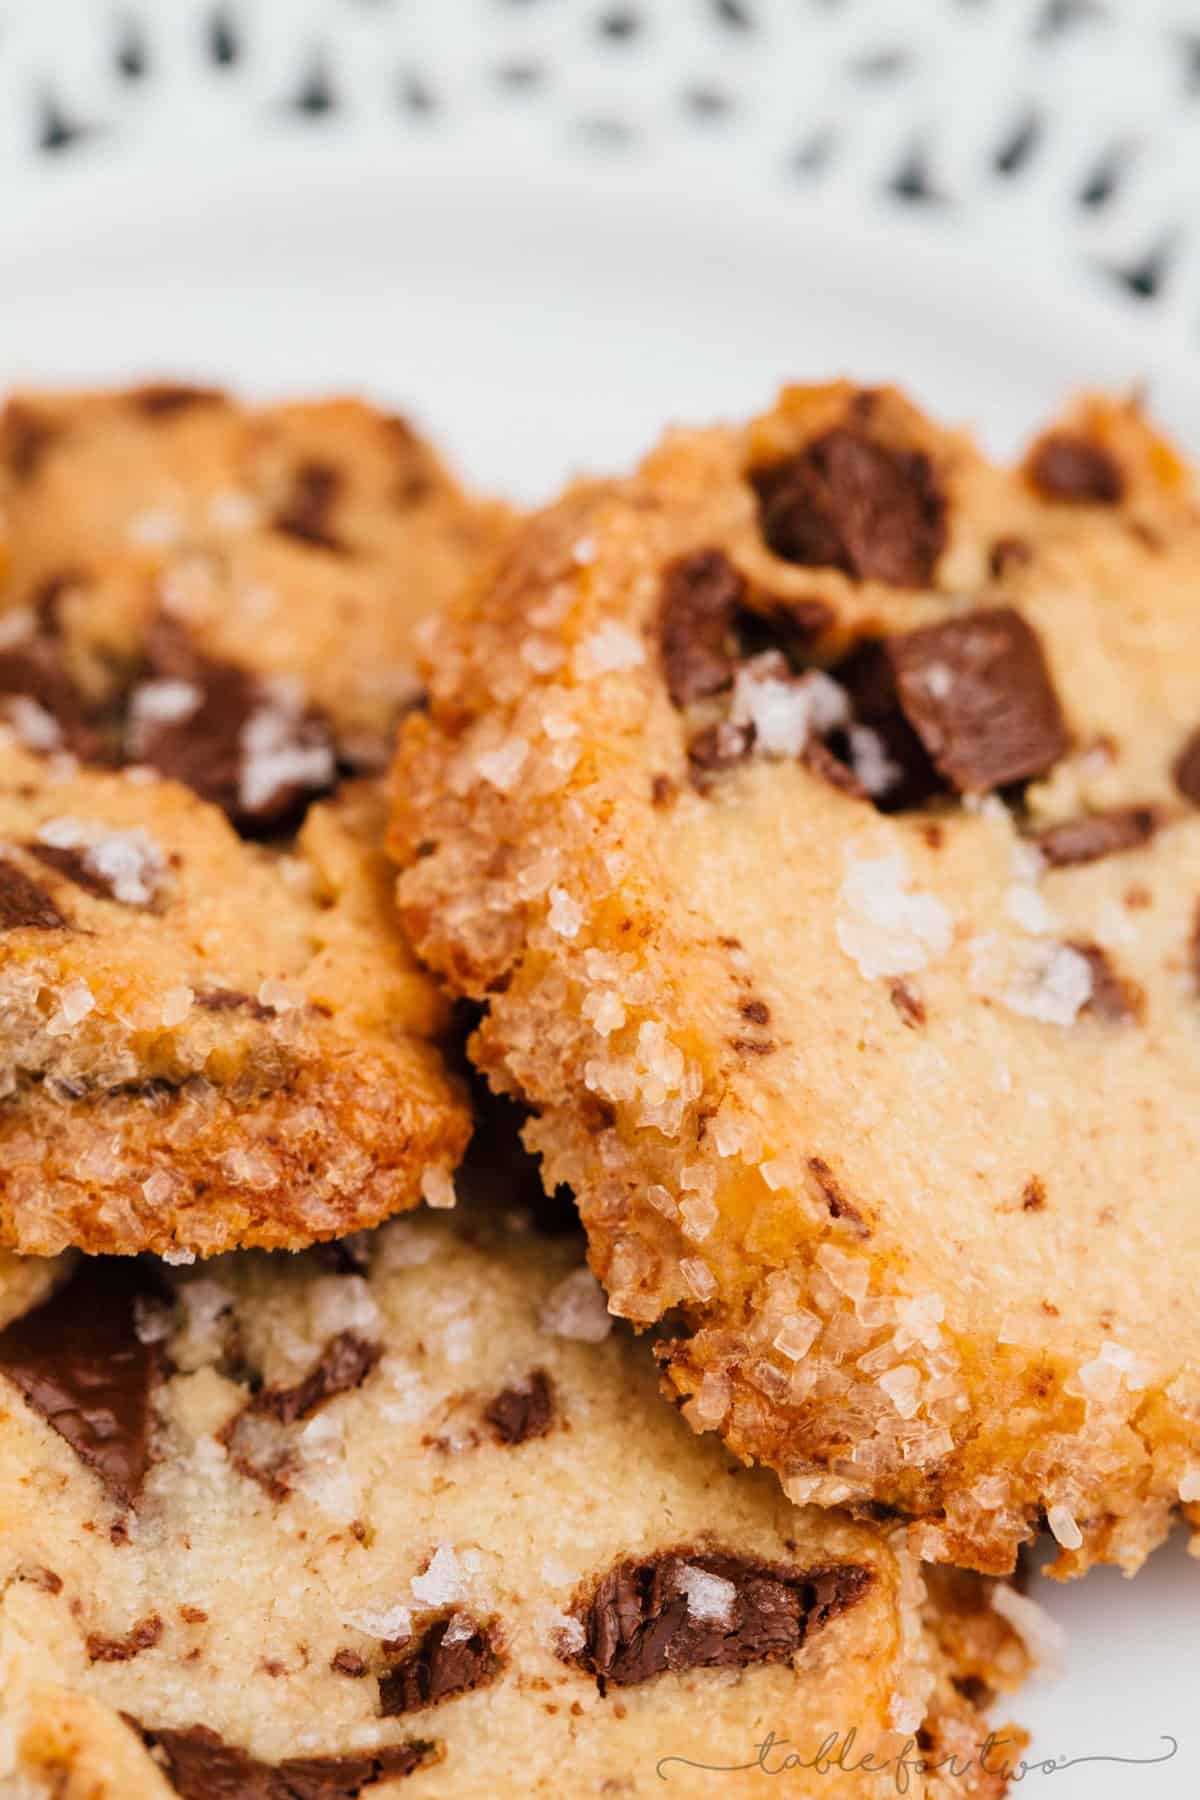 The cookies that broke the internet. These shortbread-based chocolate chip cookies are unlike any other cookie you've ever had before! You gotta give it a try!